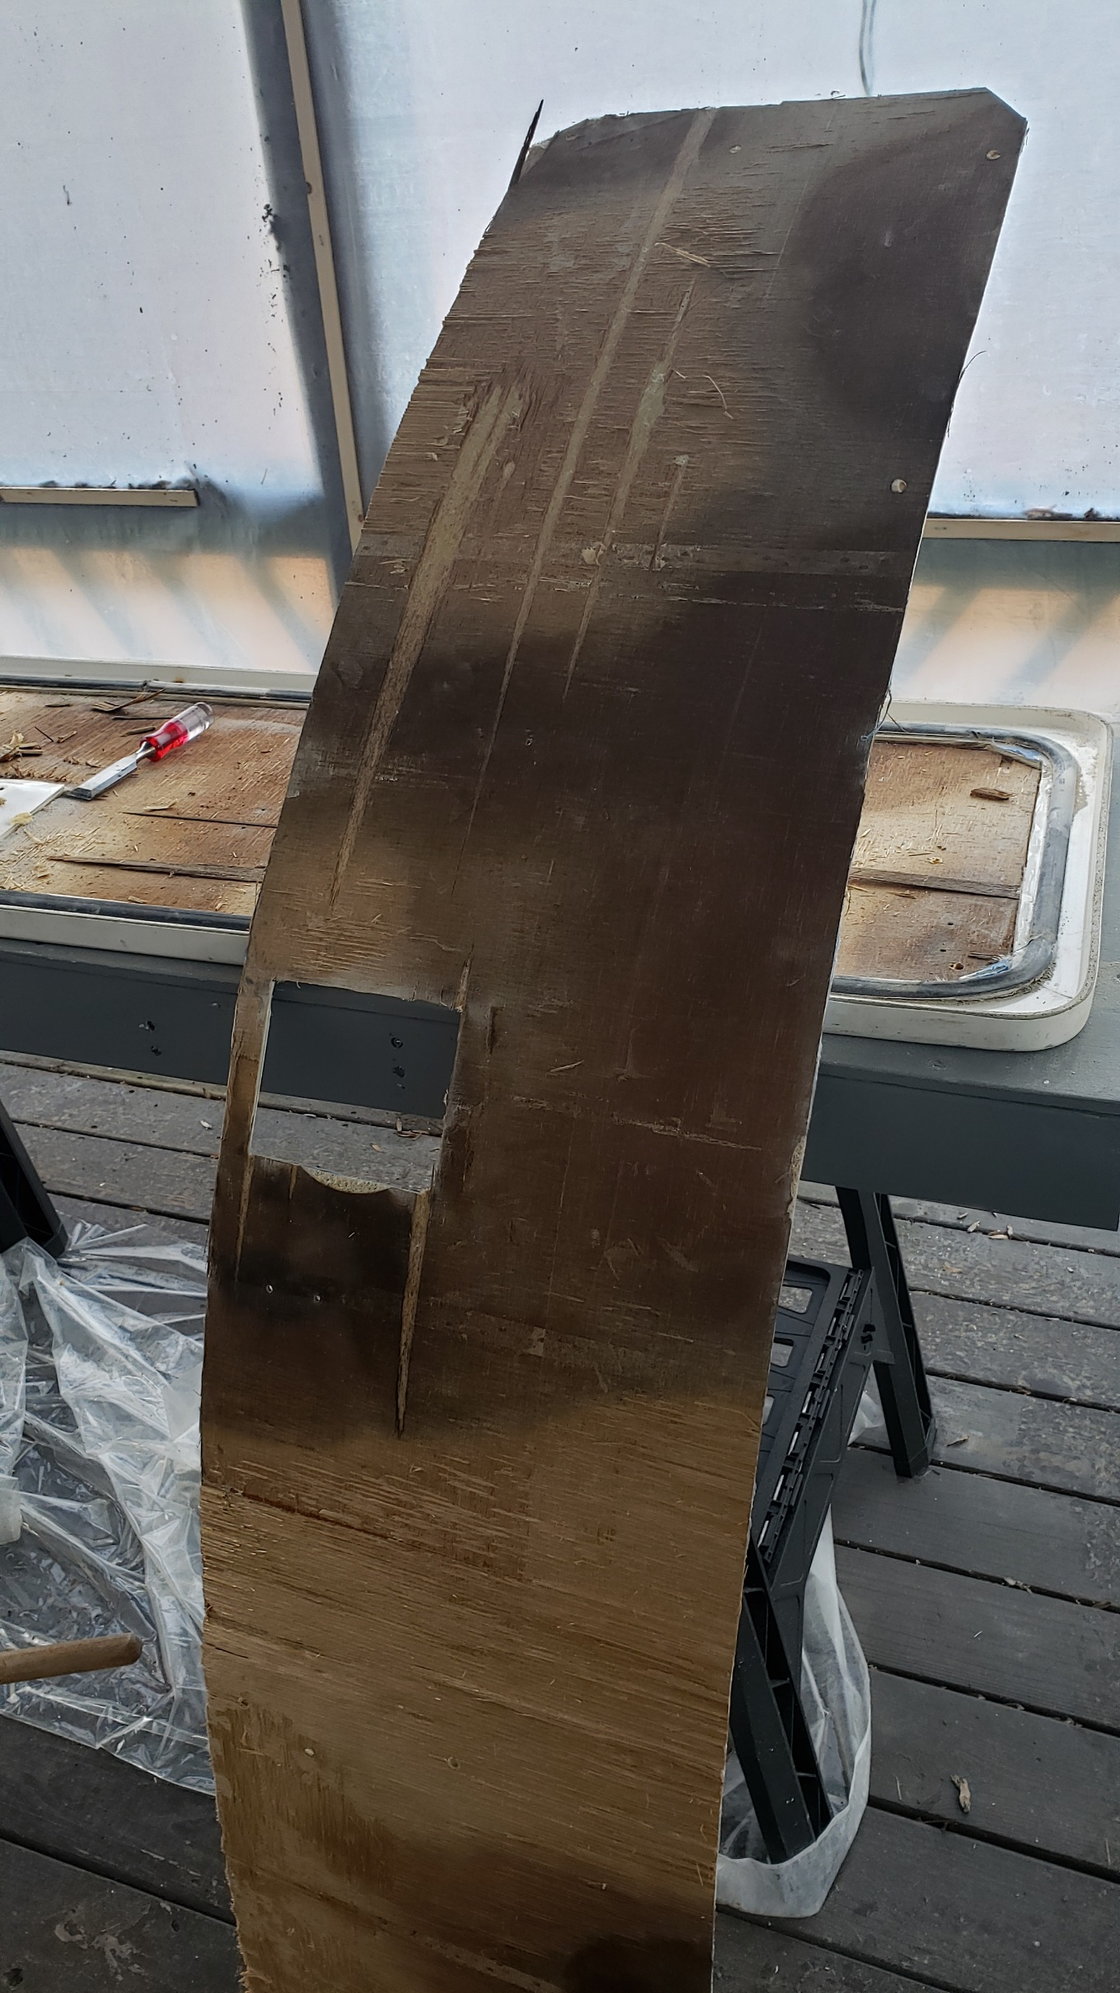 Fish box doors repair advice needed - The Hull Truth - Boating and Fishing  Forum